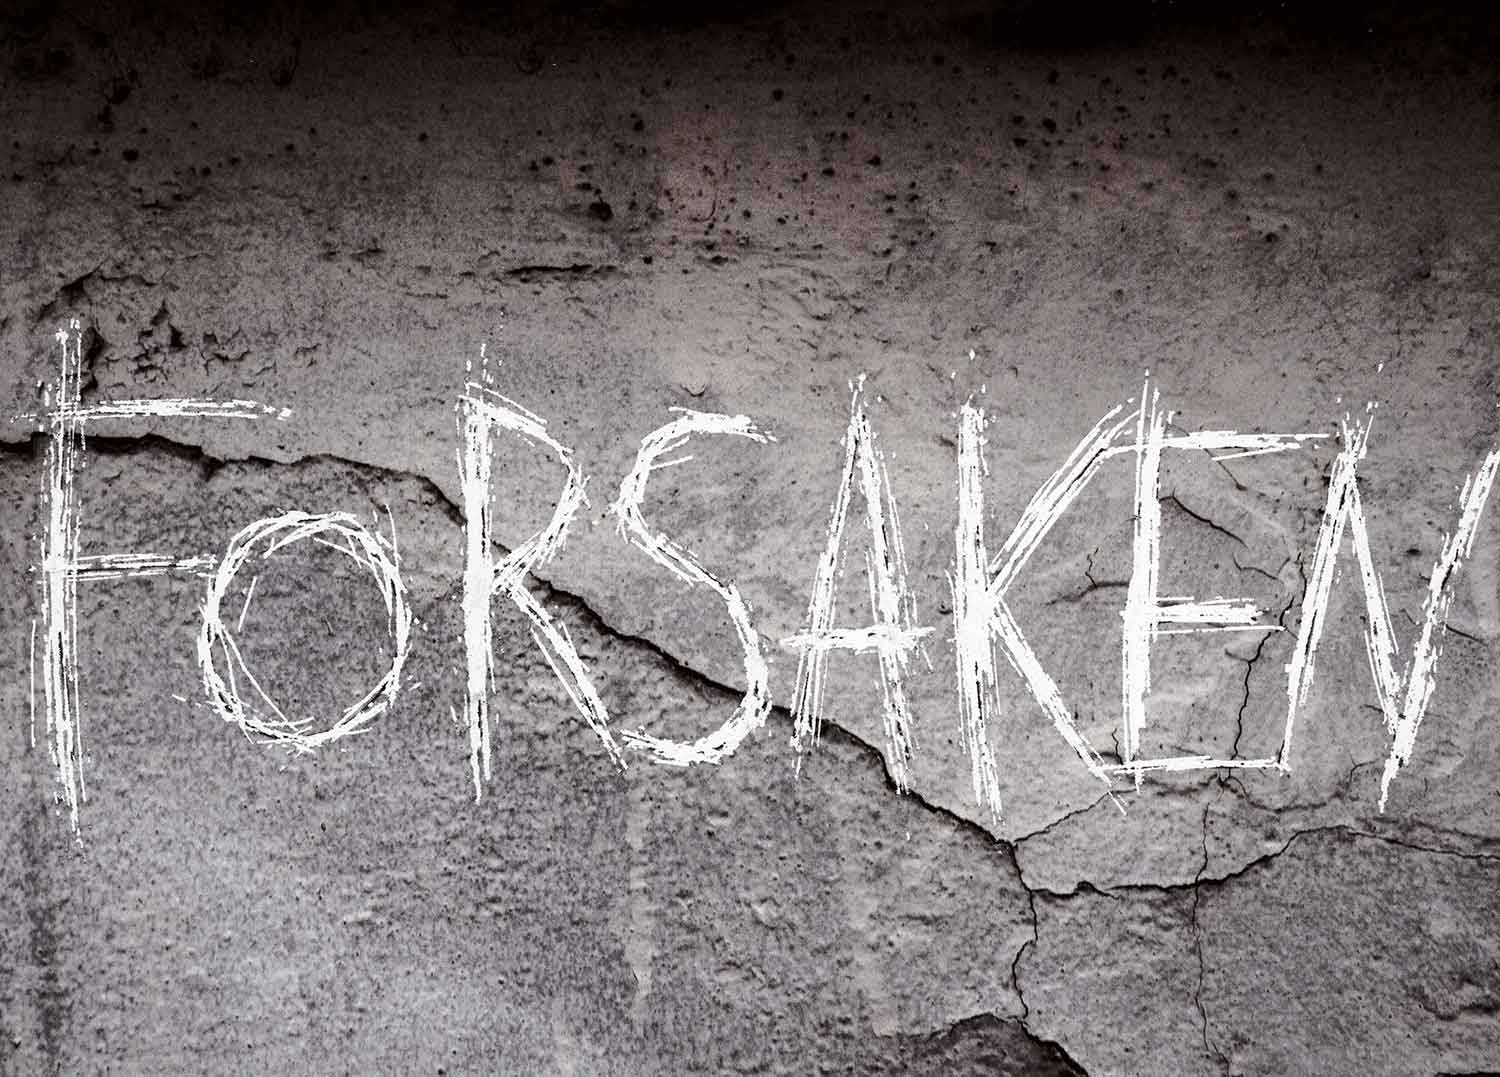 FORSAKEN - Point of breakdown, there is a loss in control, a sense of panic unable to fix yourself, and pull yourself together.